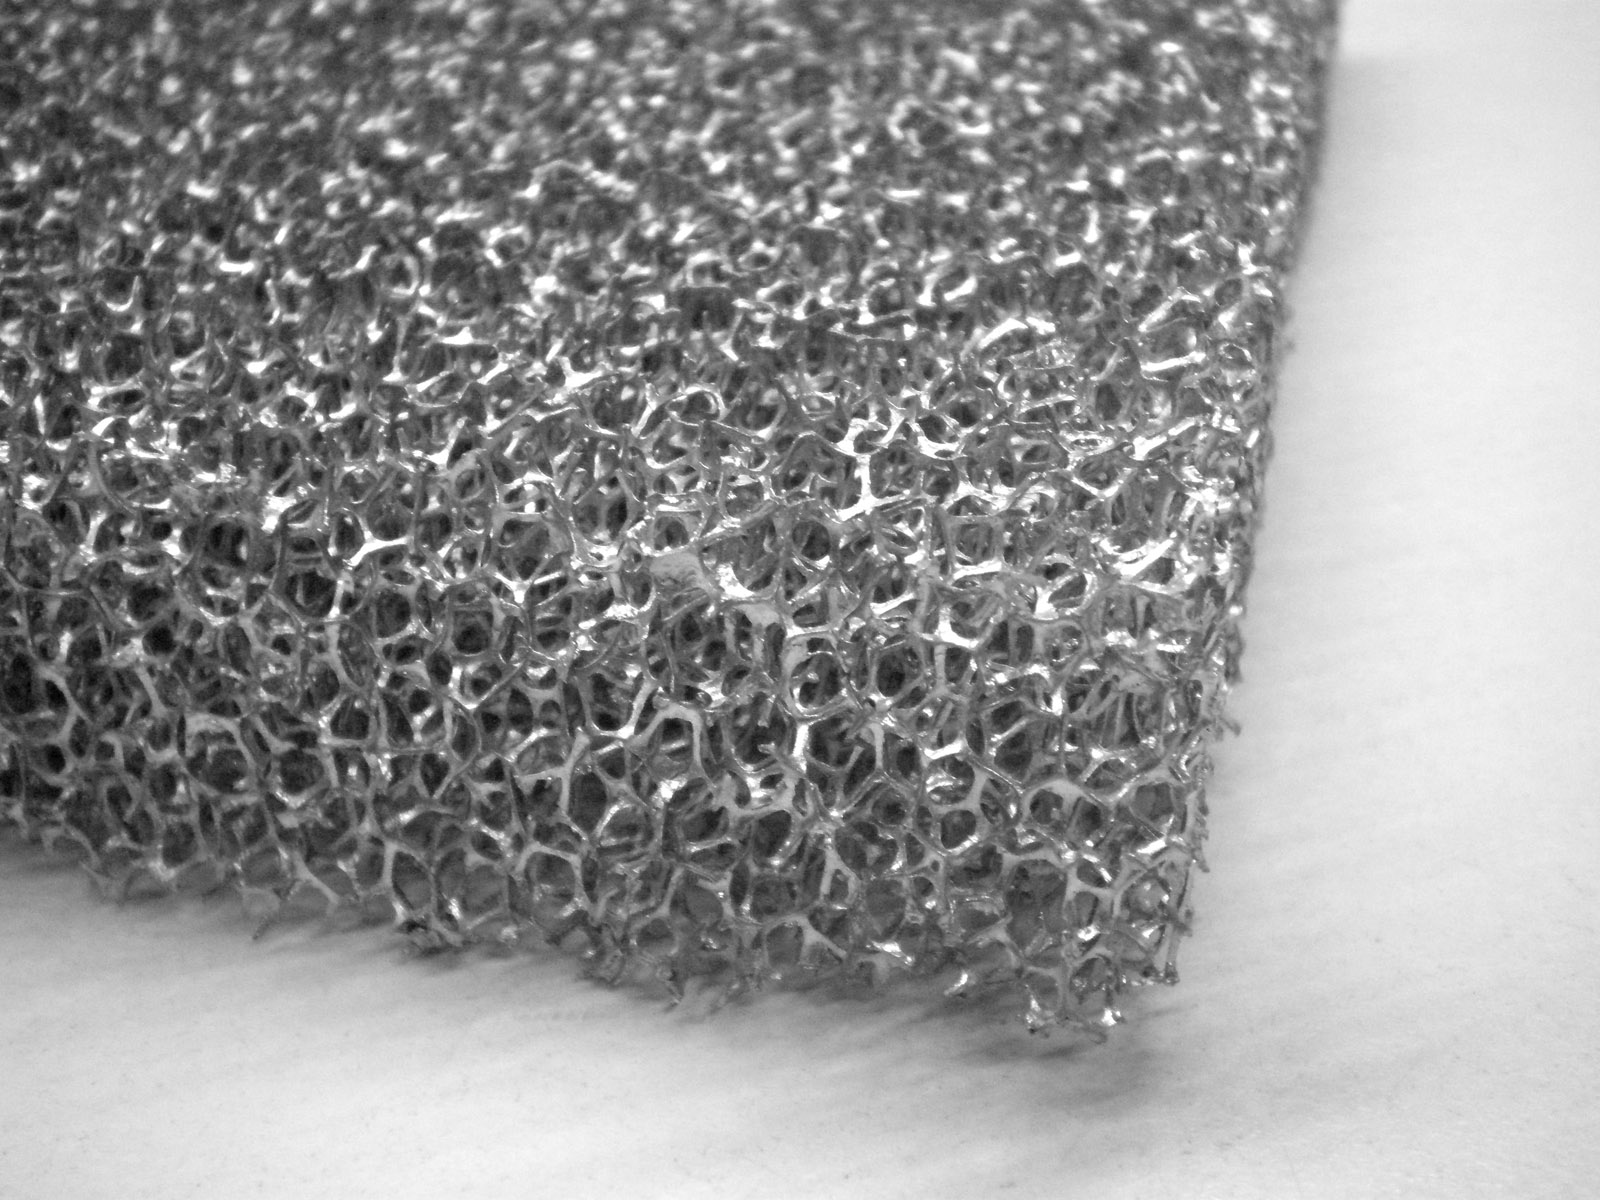 The metal sponge is manufactured in a casting process.